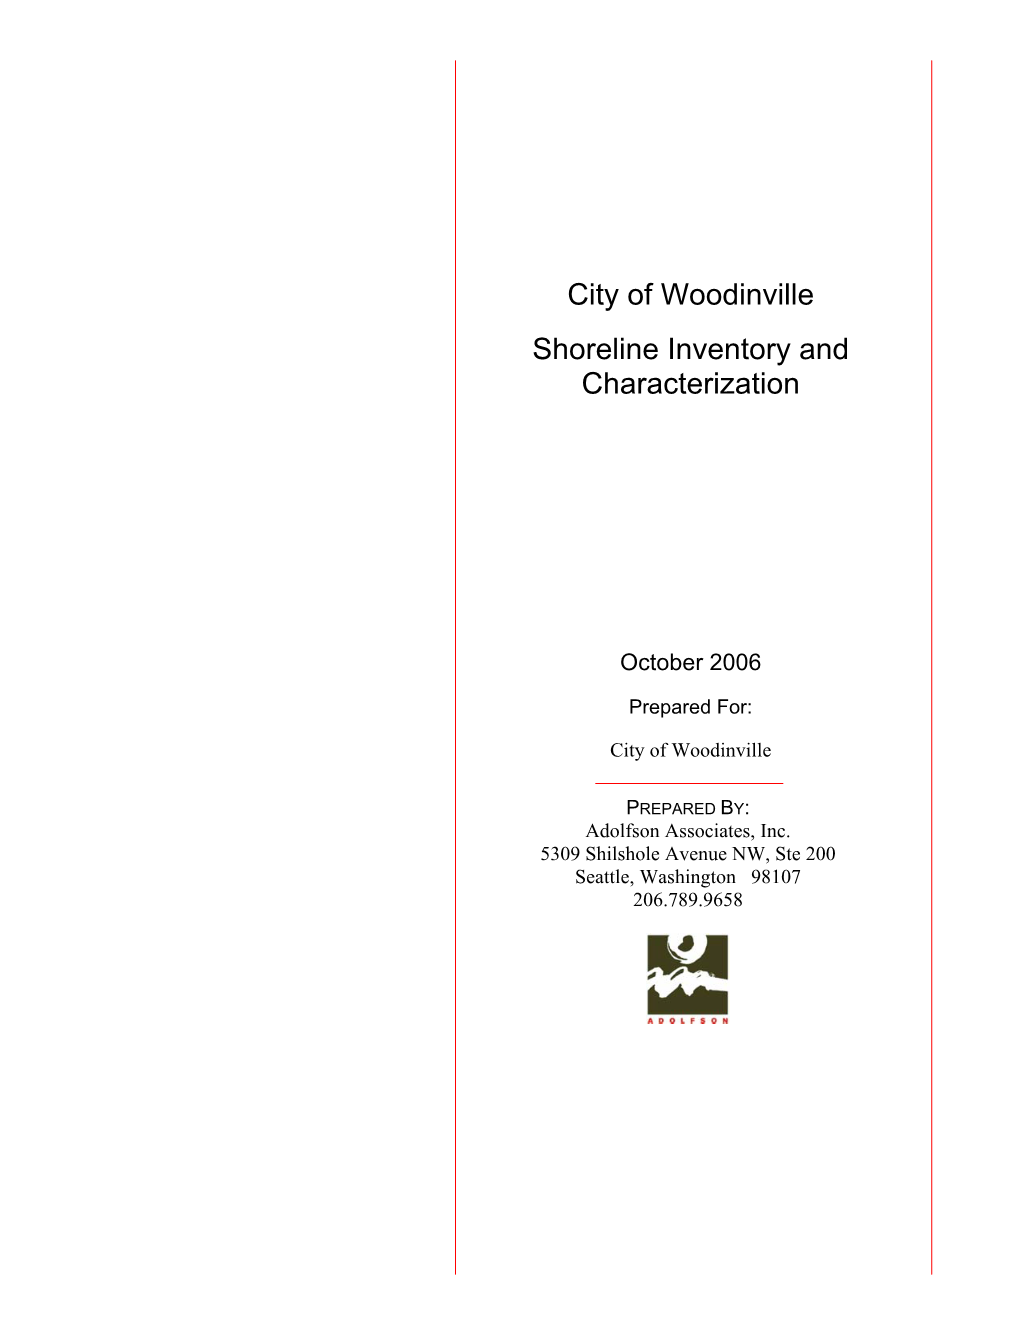 City of Woodinville Shoreline Inventory and Characterization